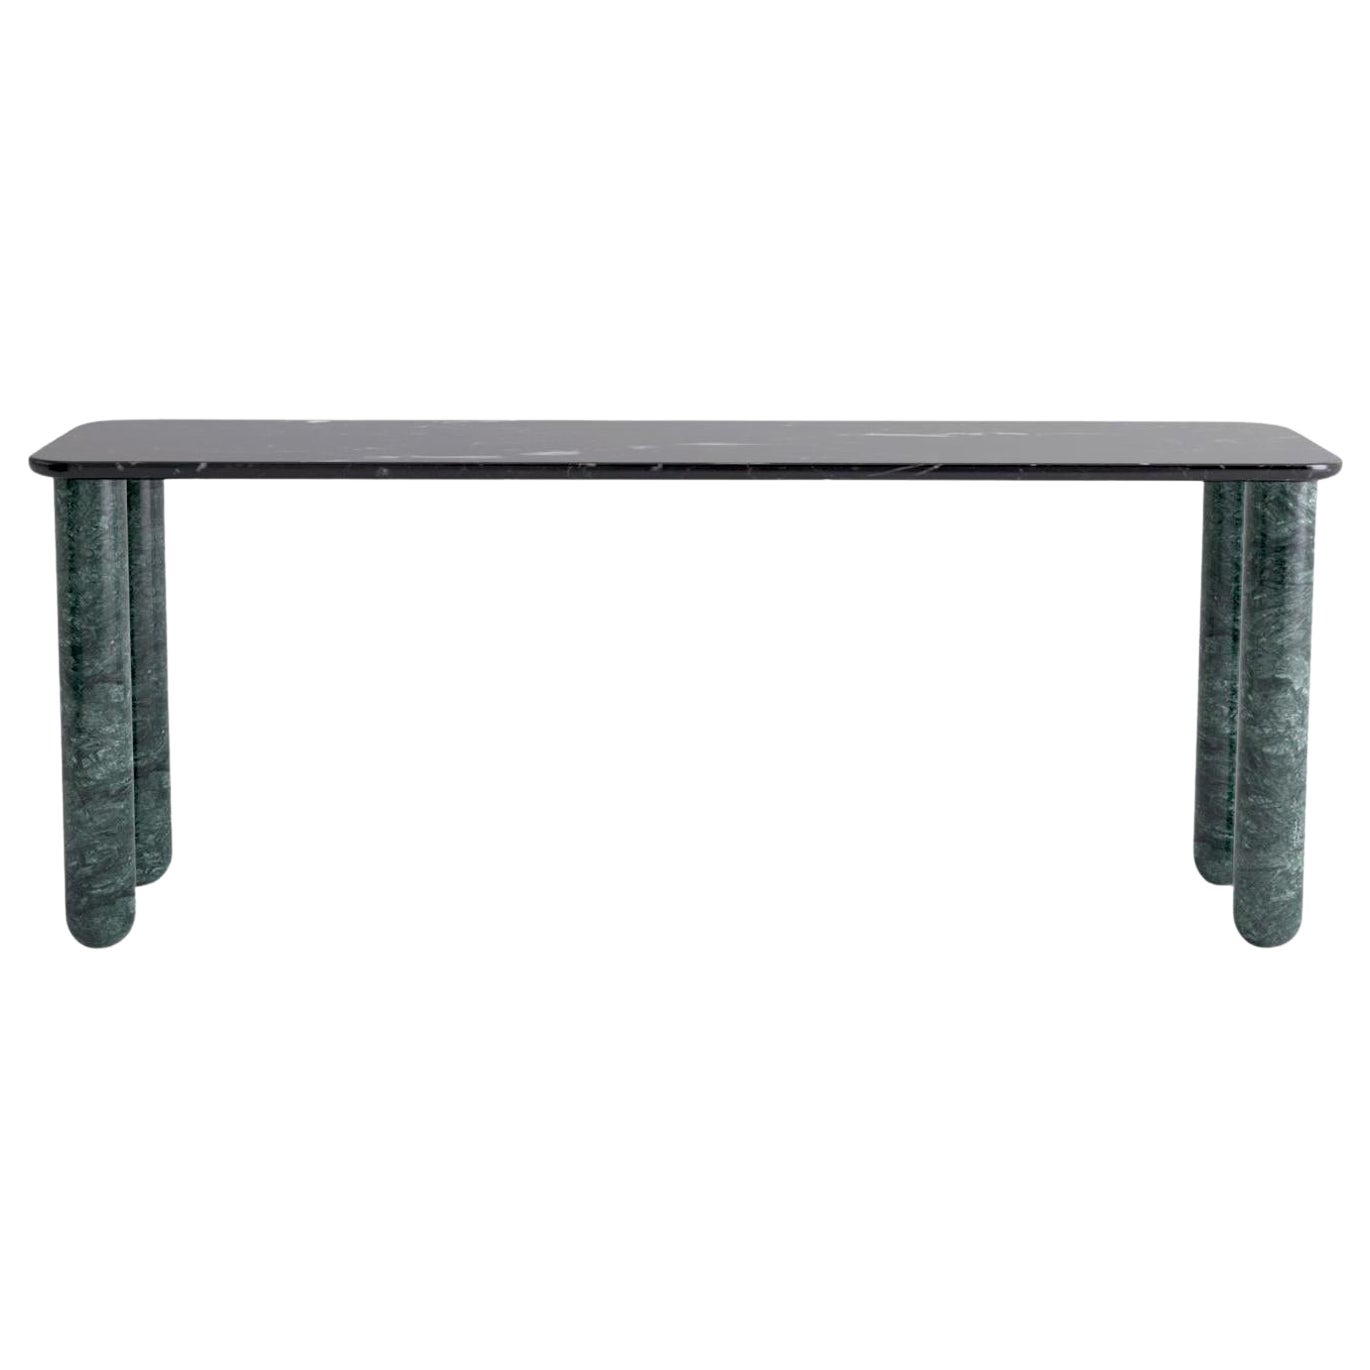 Large Black and Green Marble "Sunday" Dining Table, Jean-Baptiste Souletie For Sale